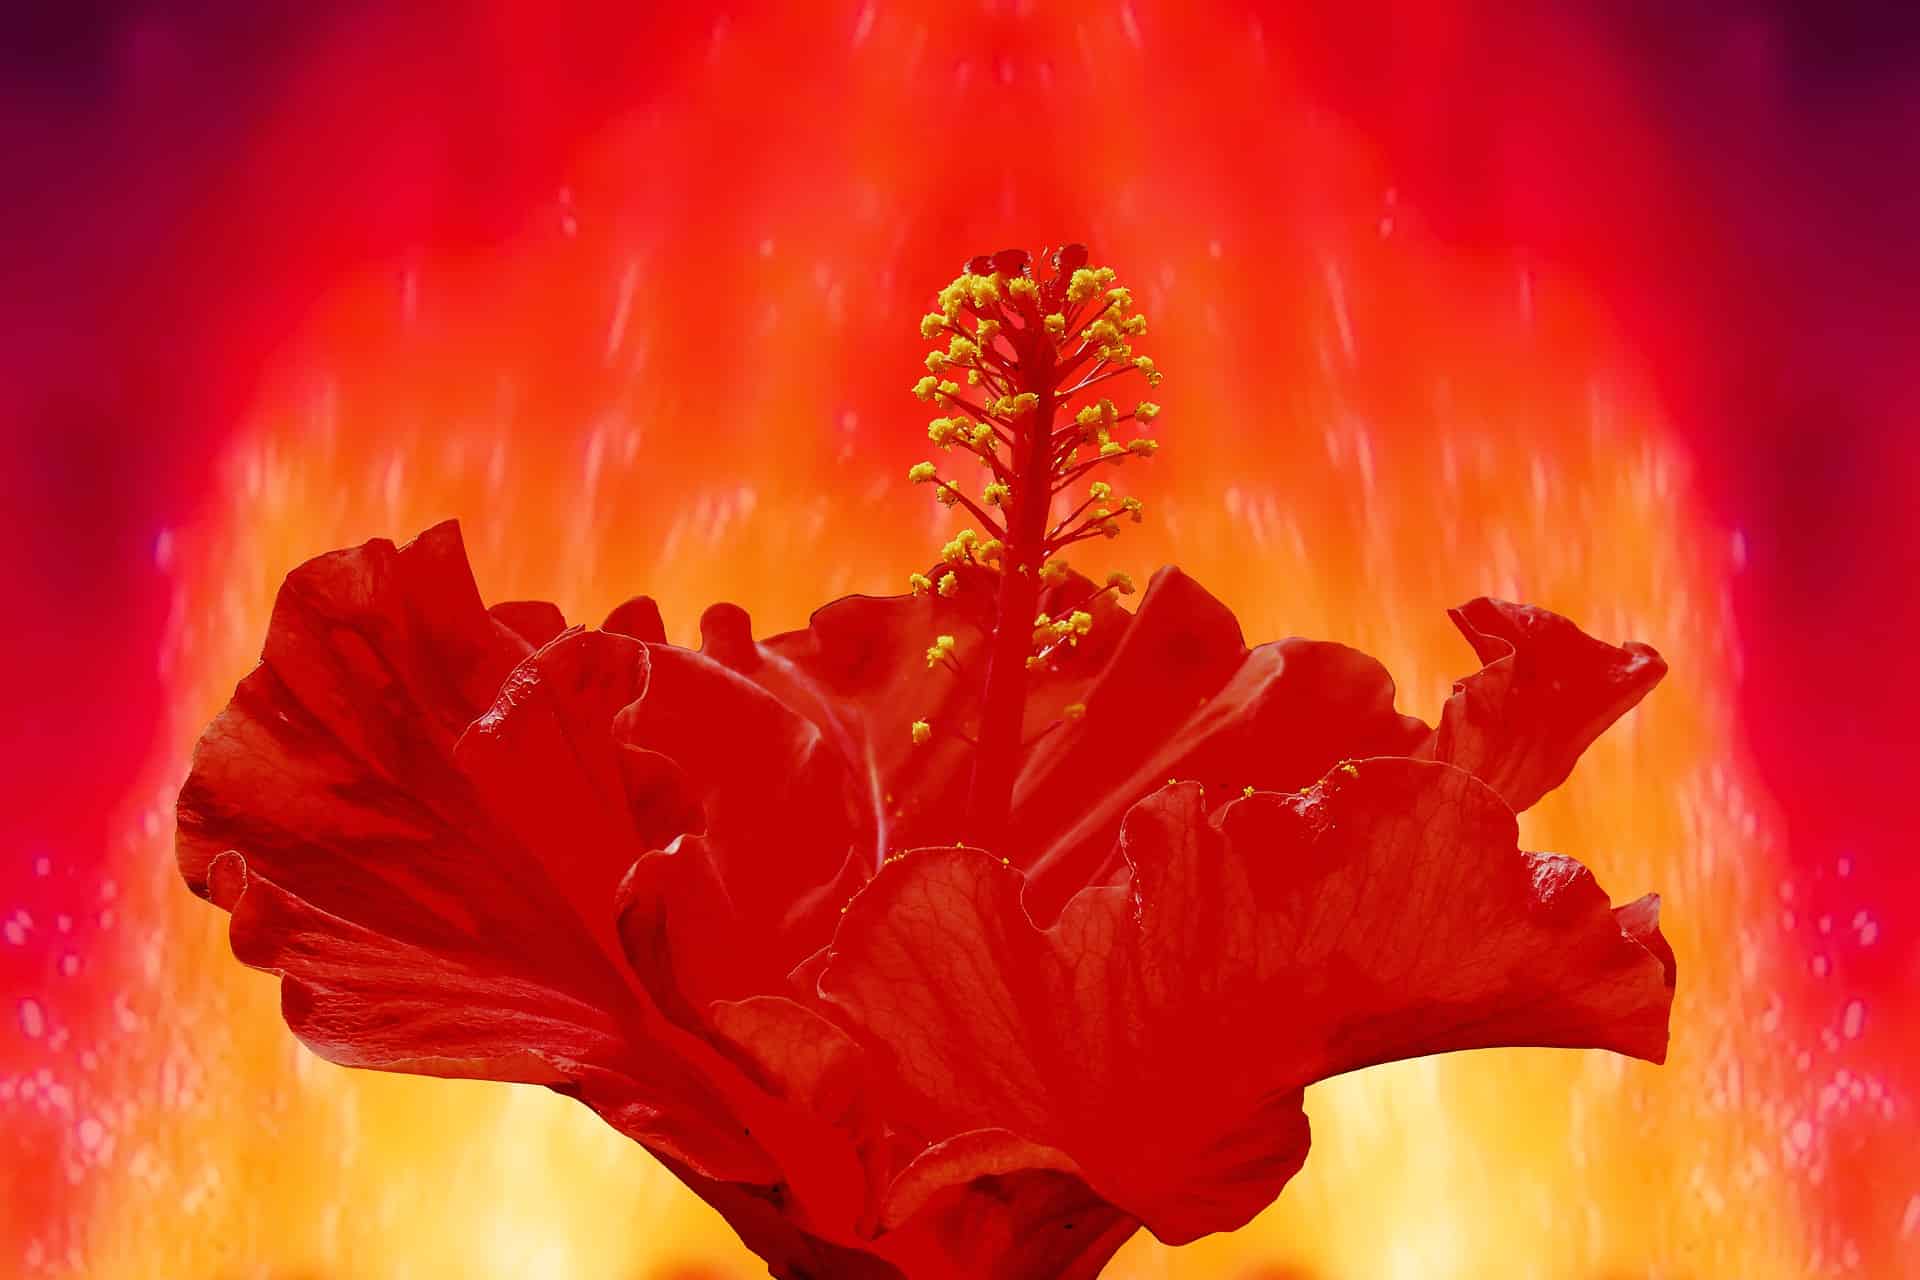 Photo of hibiscus on fire by blende12 for Pixabay